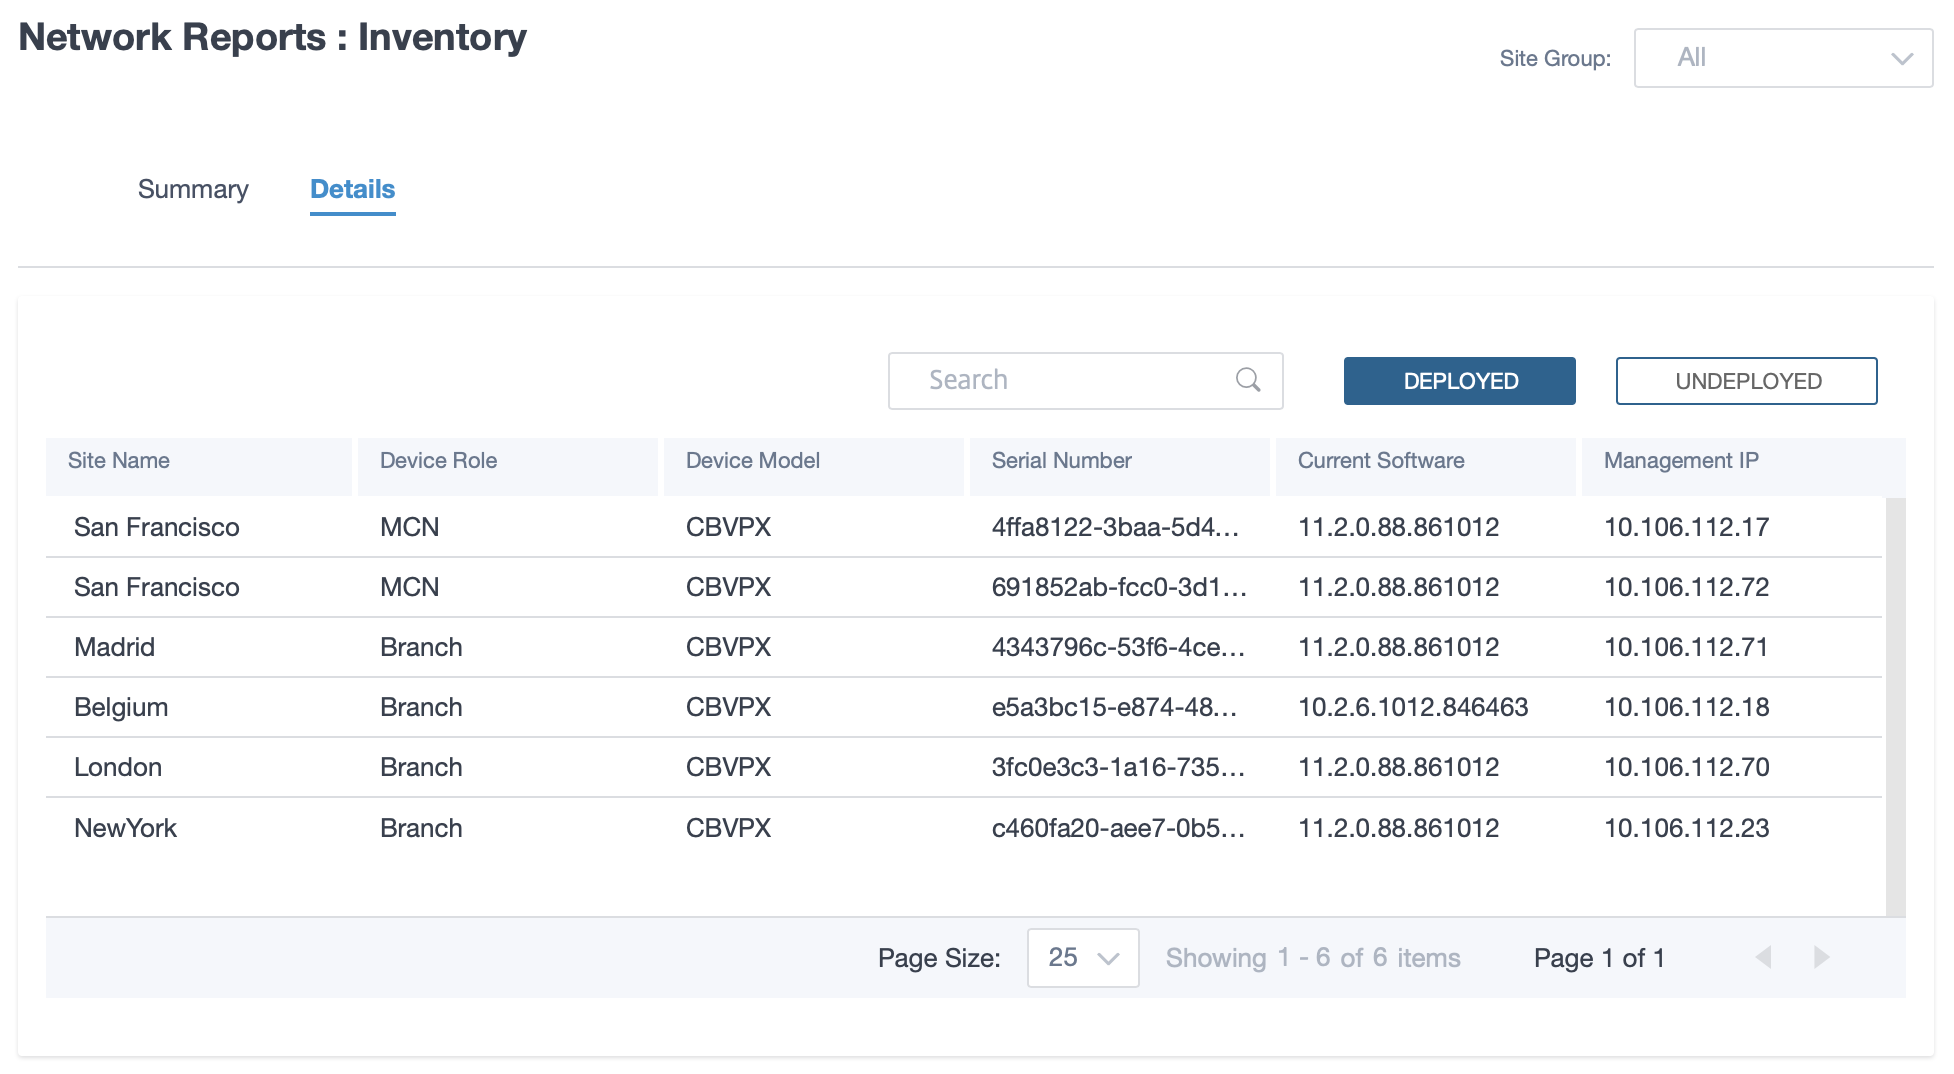 Customer network reports inventory detail